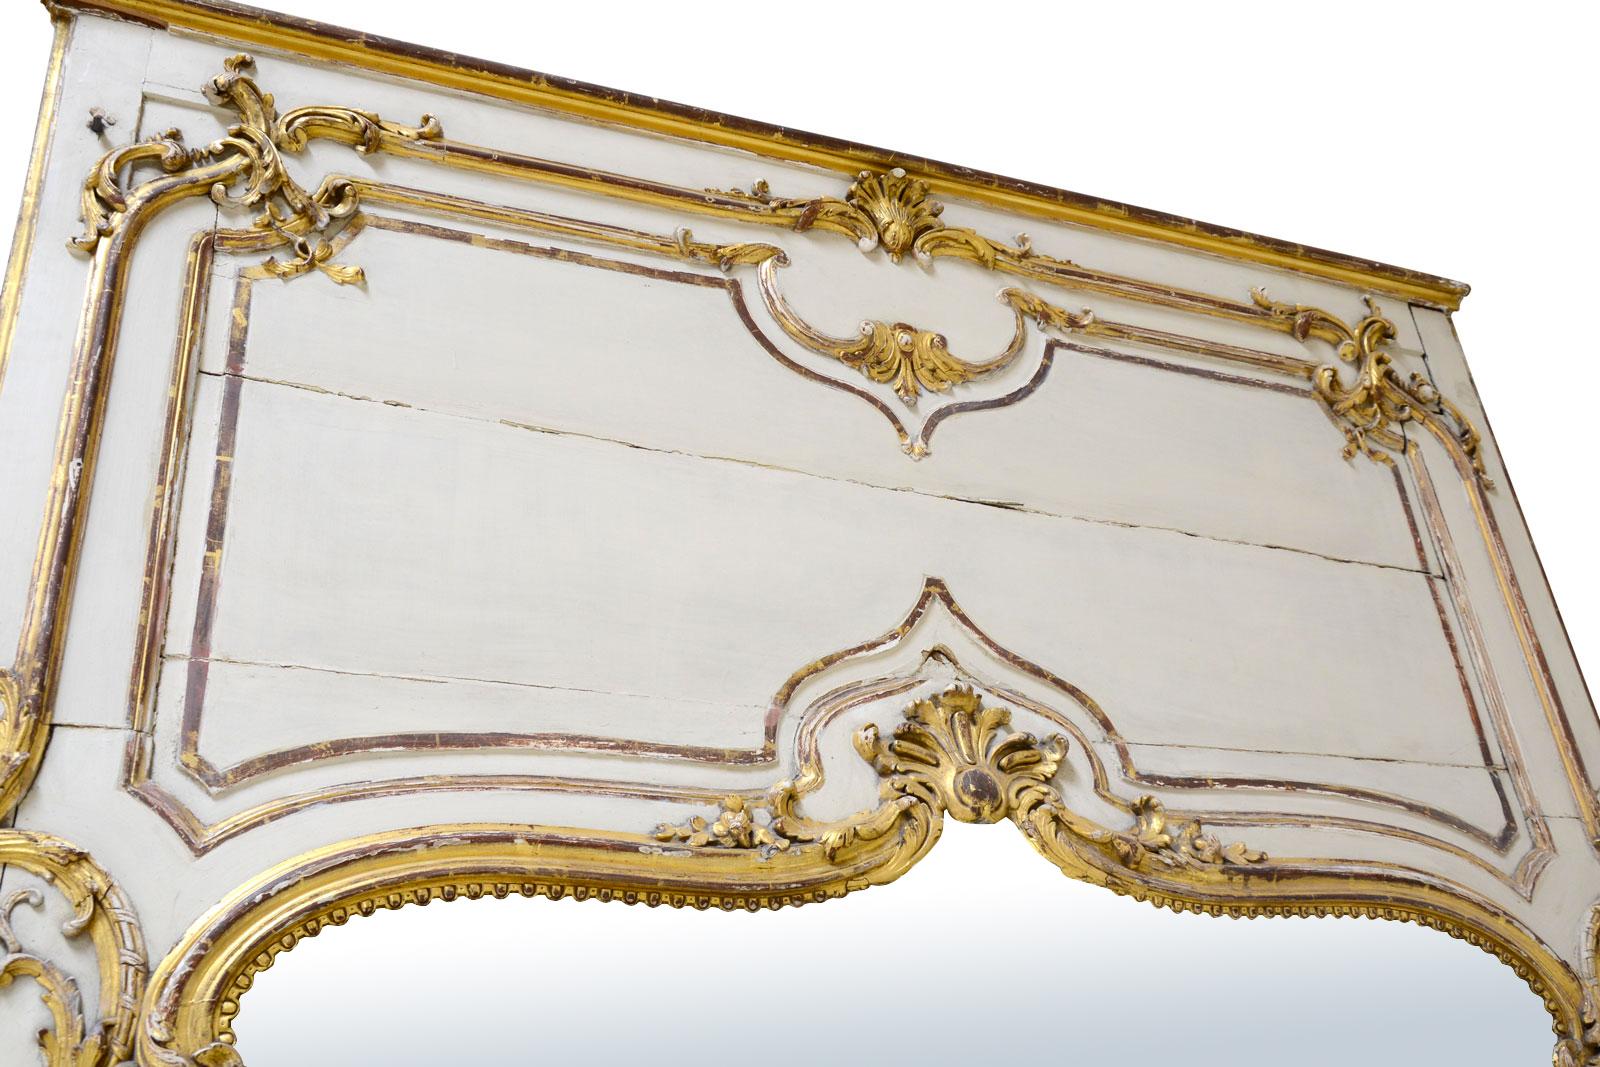 Dating from the 19th century, Louis 15 style gilded wood and white rechampi trumeau. It is animated with plants motifs and foliage and a shell overlooks the mirror bordered by a beaded frieze.